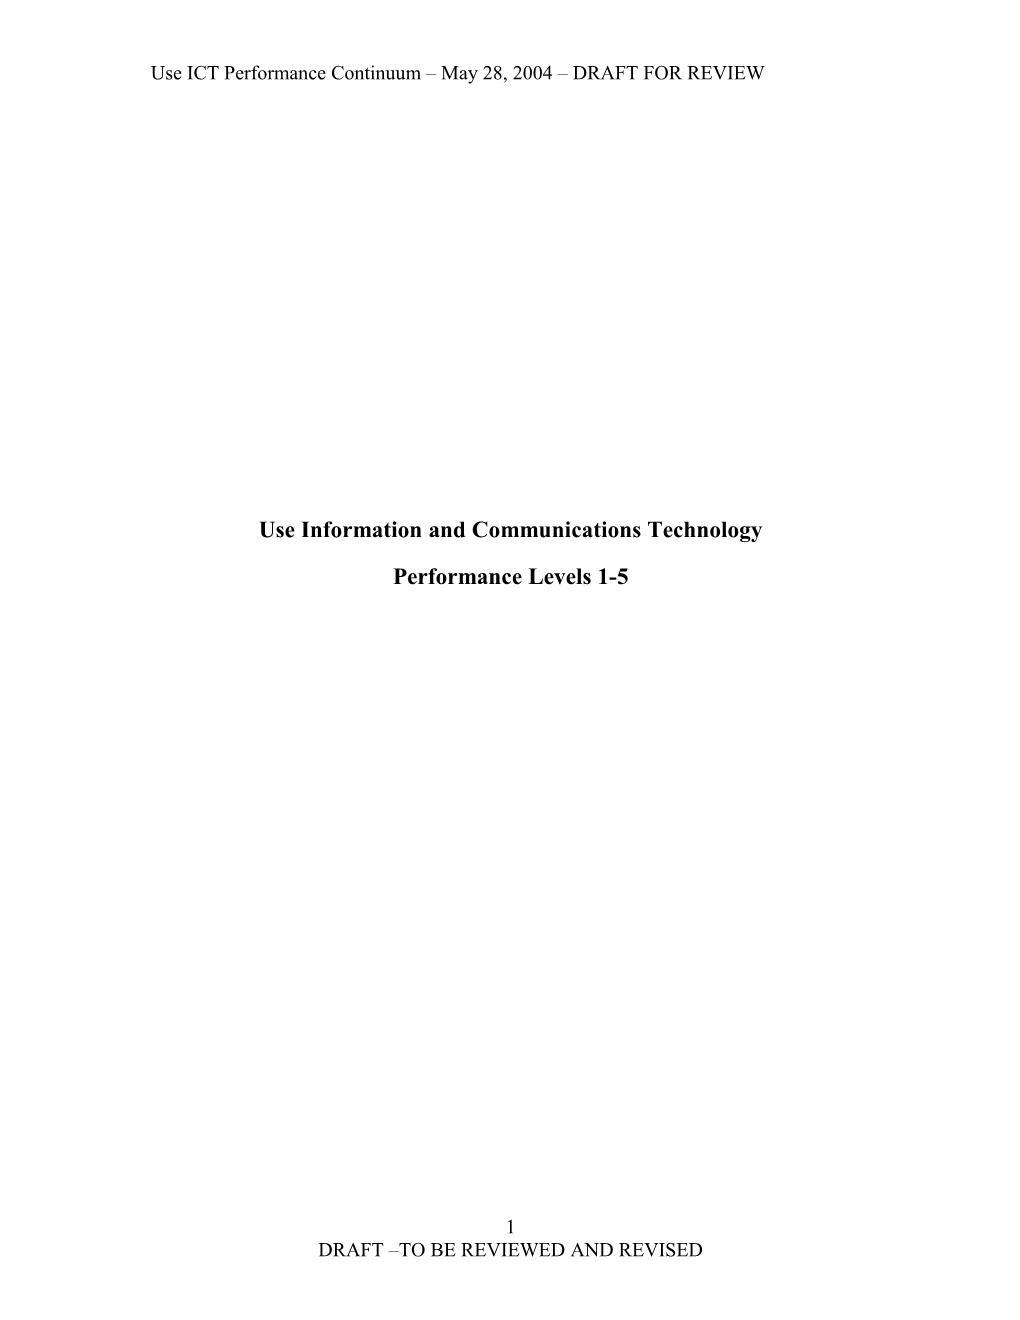 Use Information and Communications Technology PERFORMANCE LEVEL 1